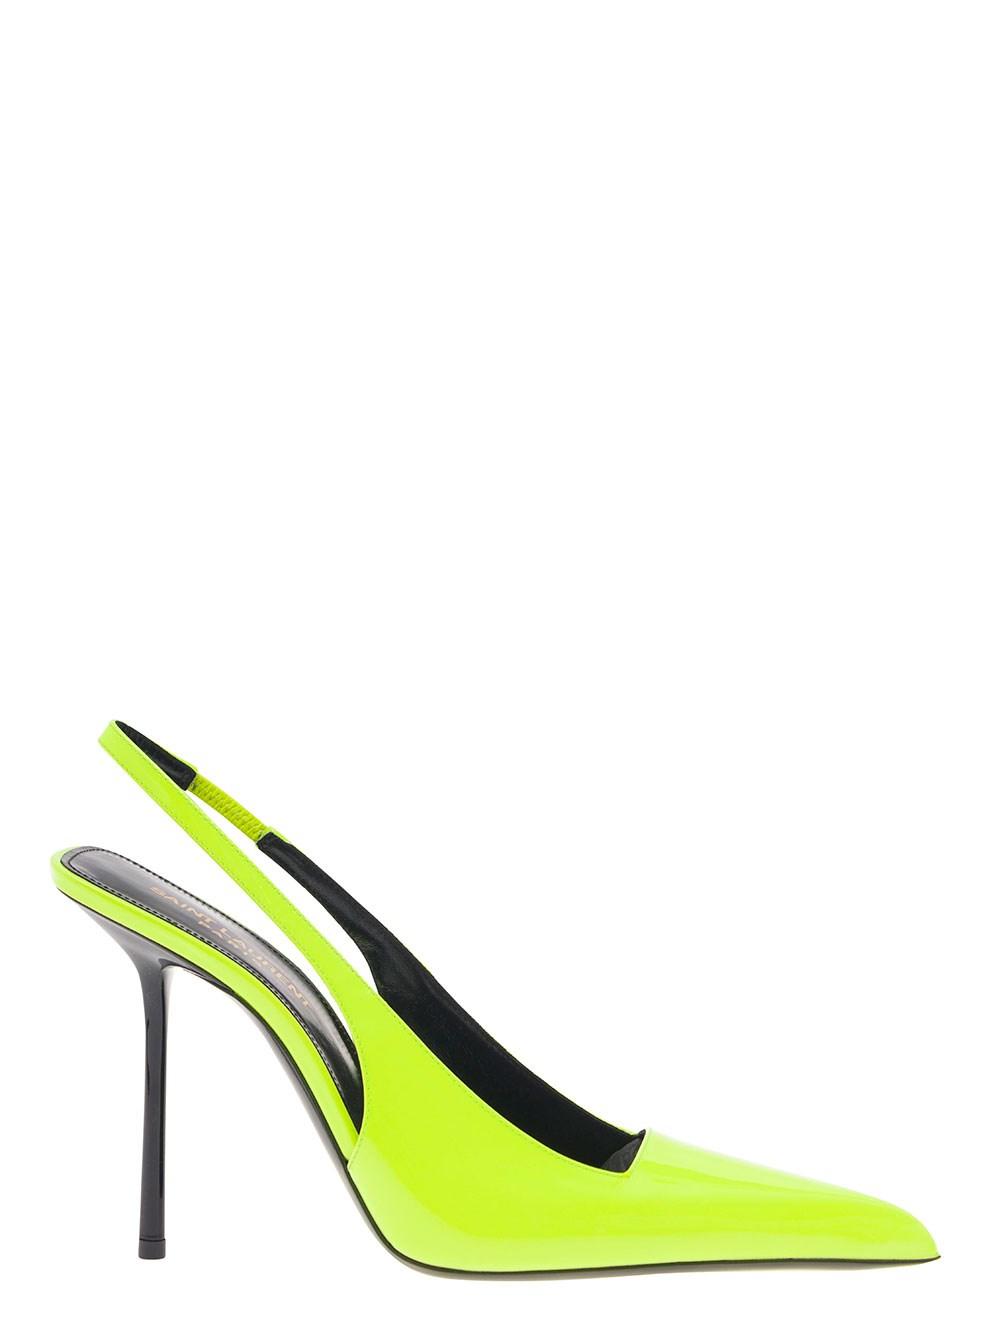 Saint Laurent Neon Yellow Slingback Pumps With Long Toe In Patent ...